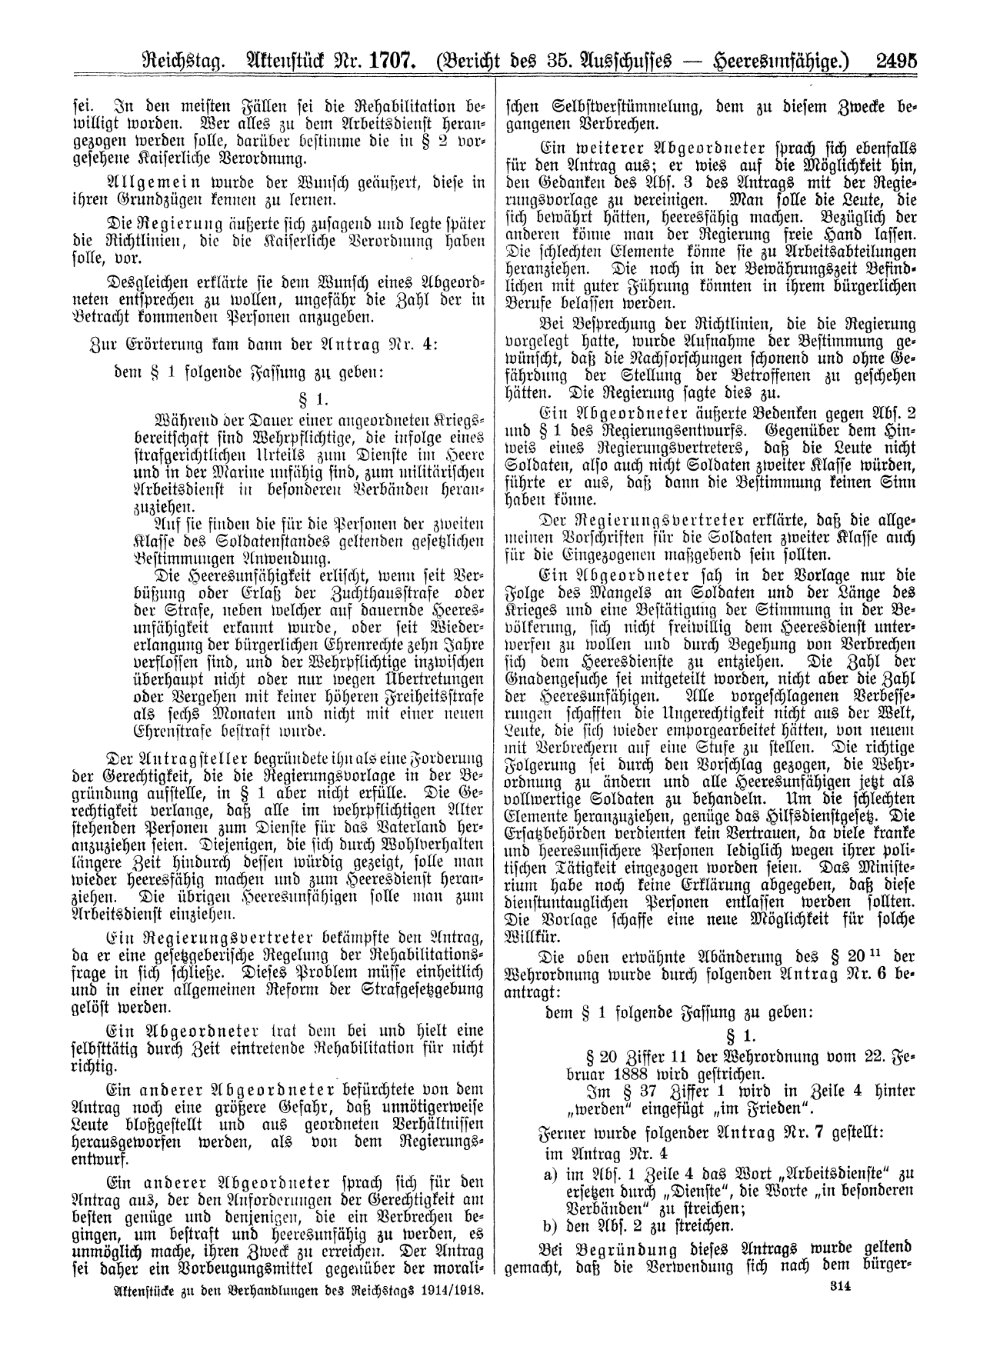 Scan of page 2495